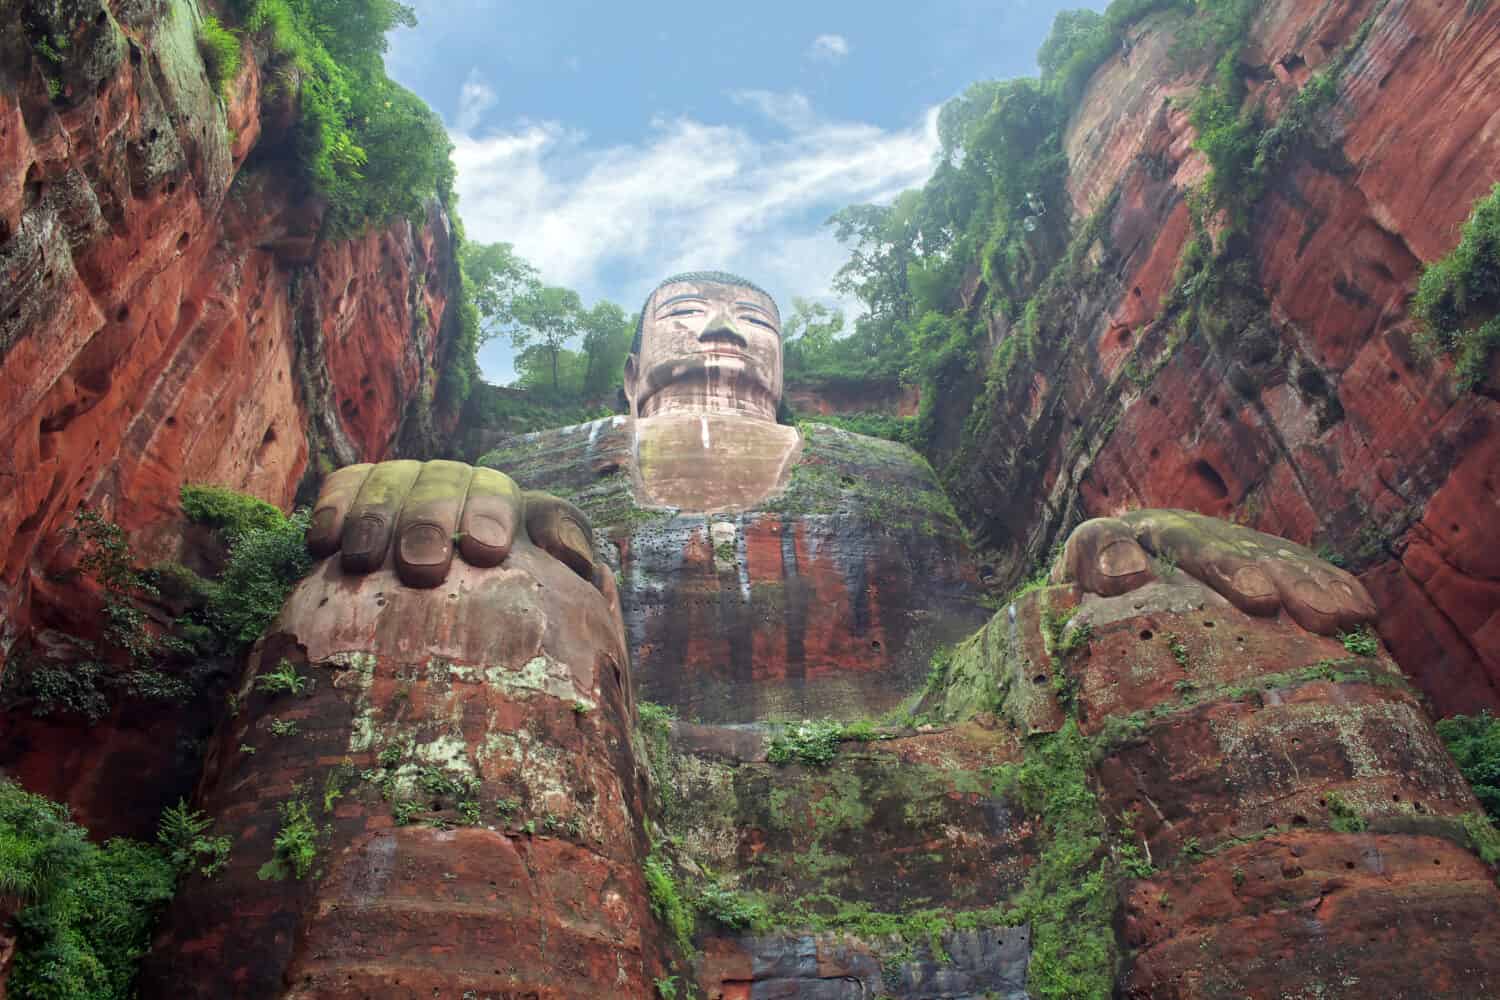  Leshan Grand Buddha is a famous cultural and historical spot in Sichuan Leshan, China, which is the world's biggest stone sitting buddha statue